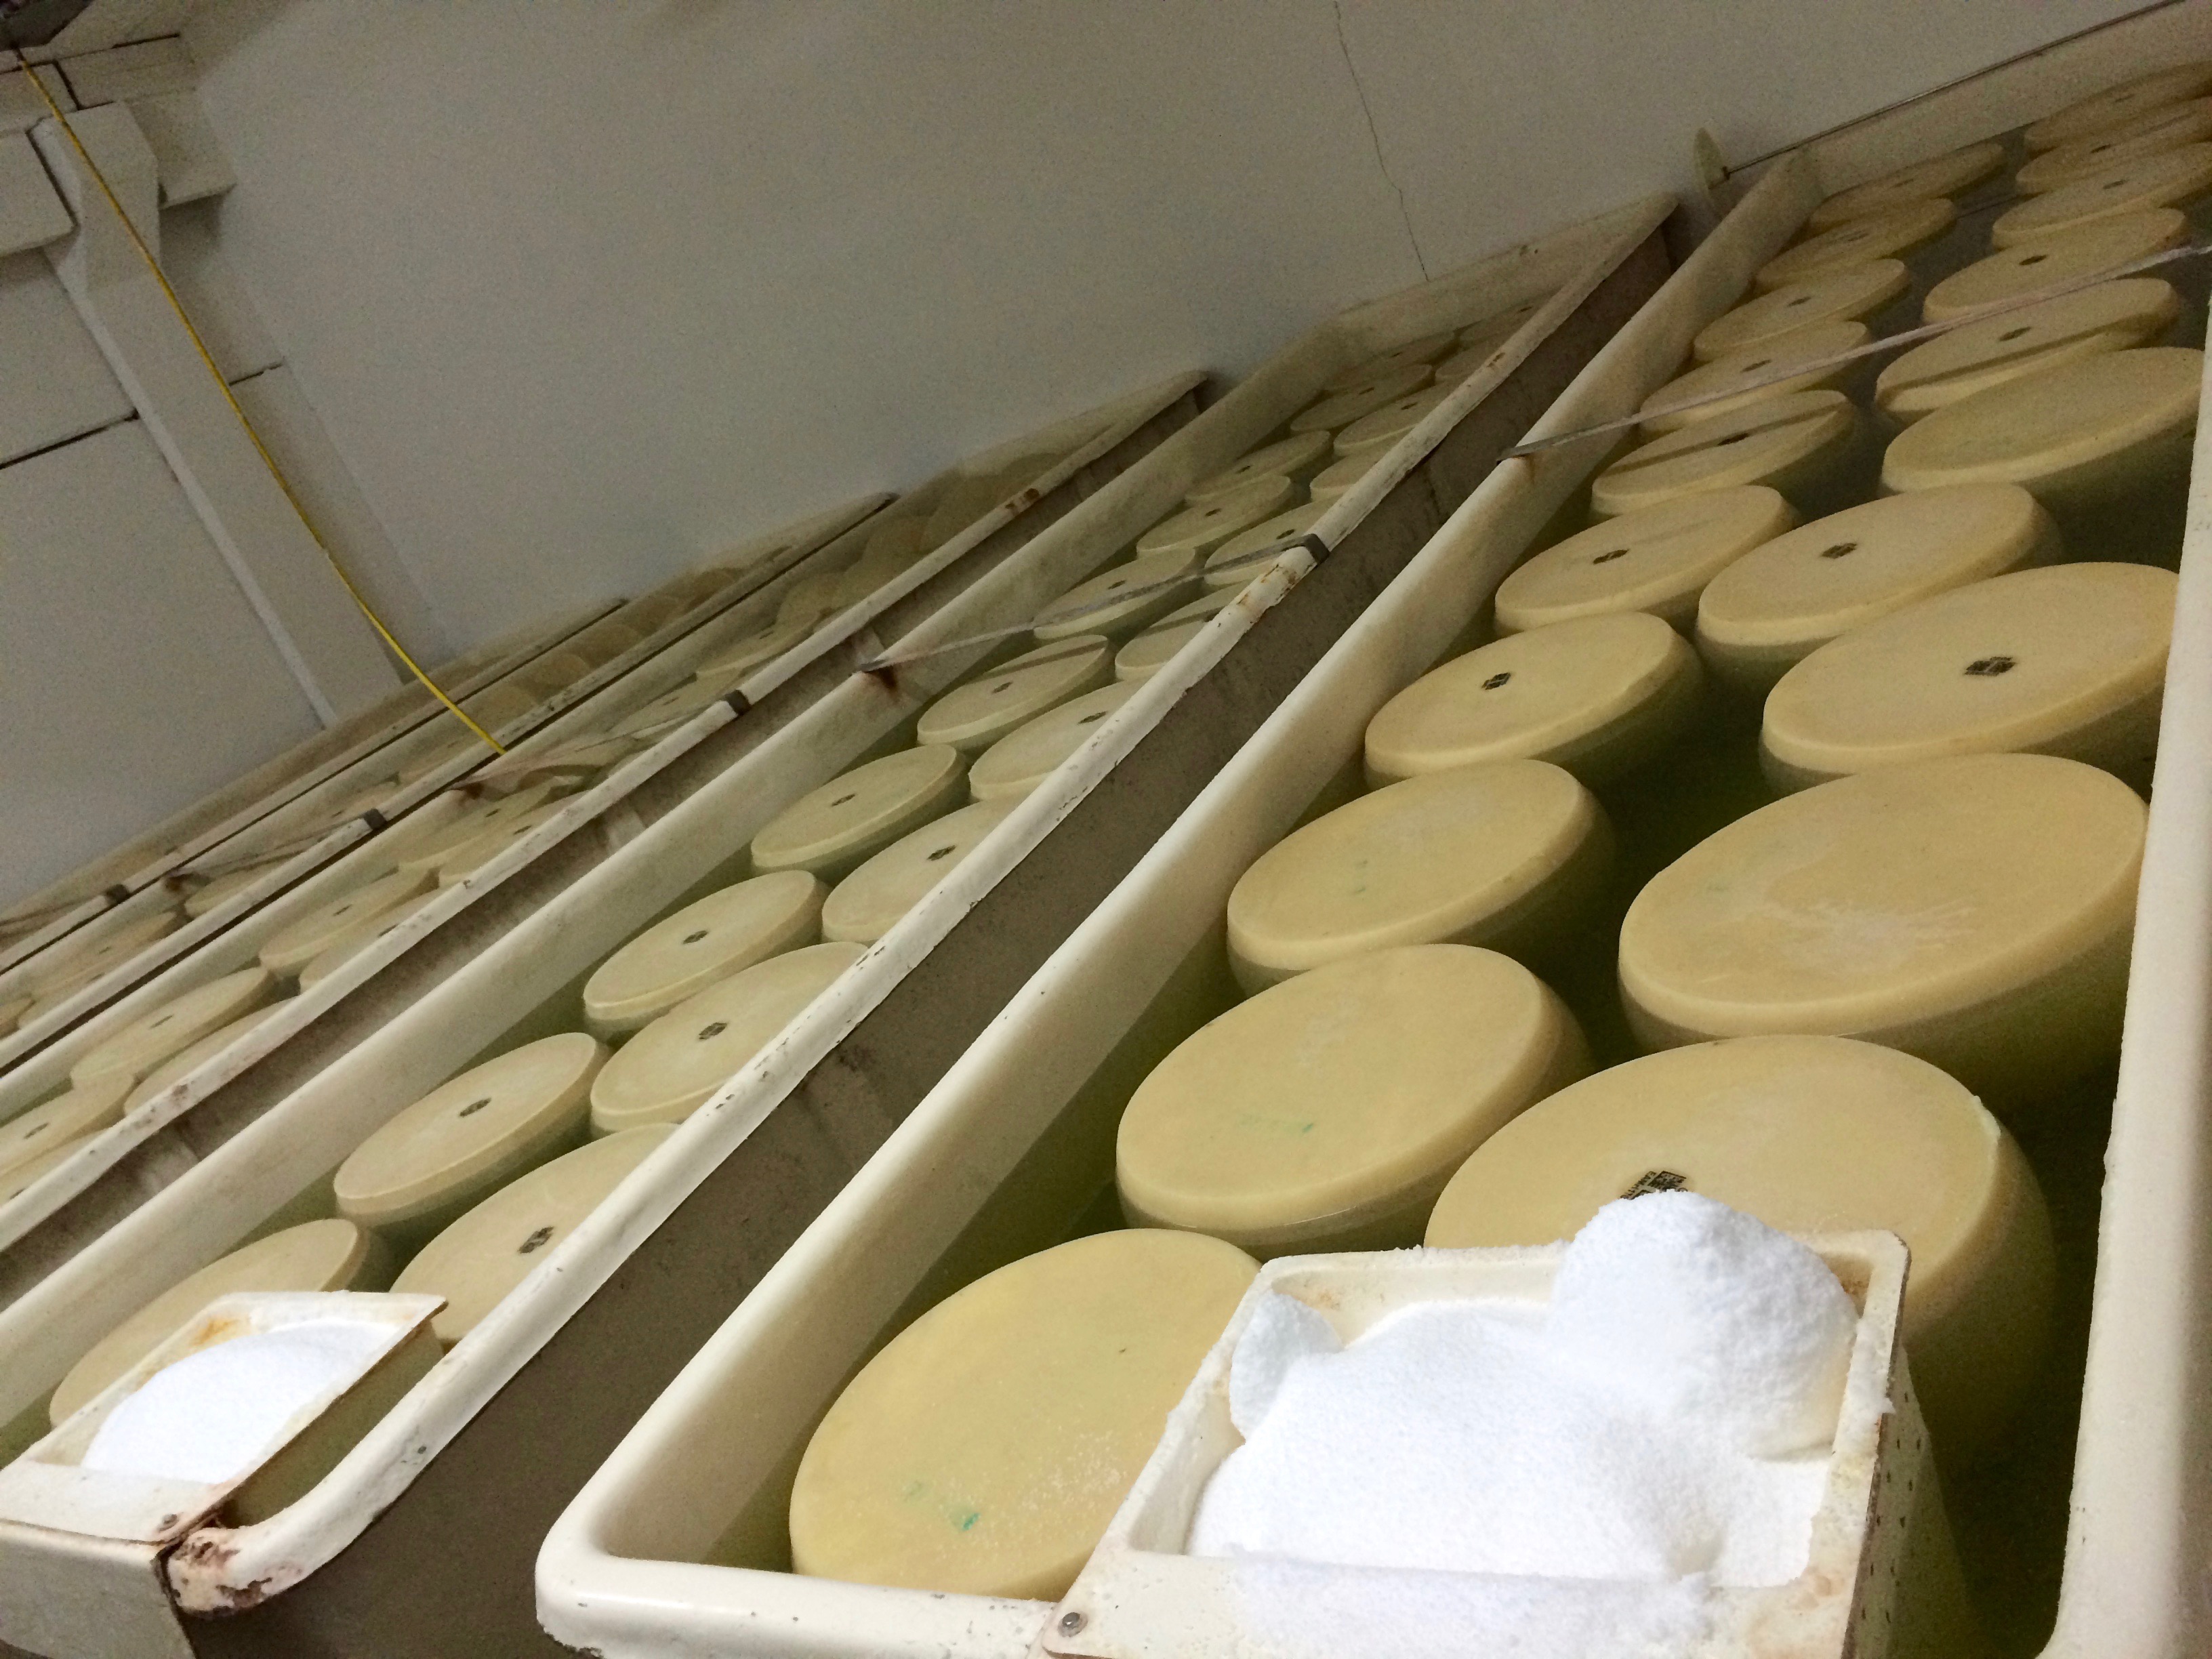 Learning about the process of making Parmigiano Reggiano during our Modena Food Tour